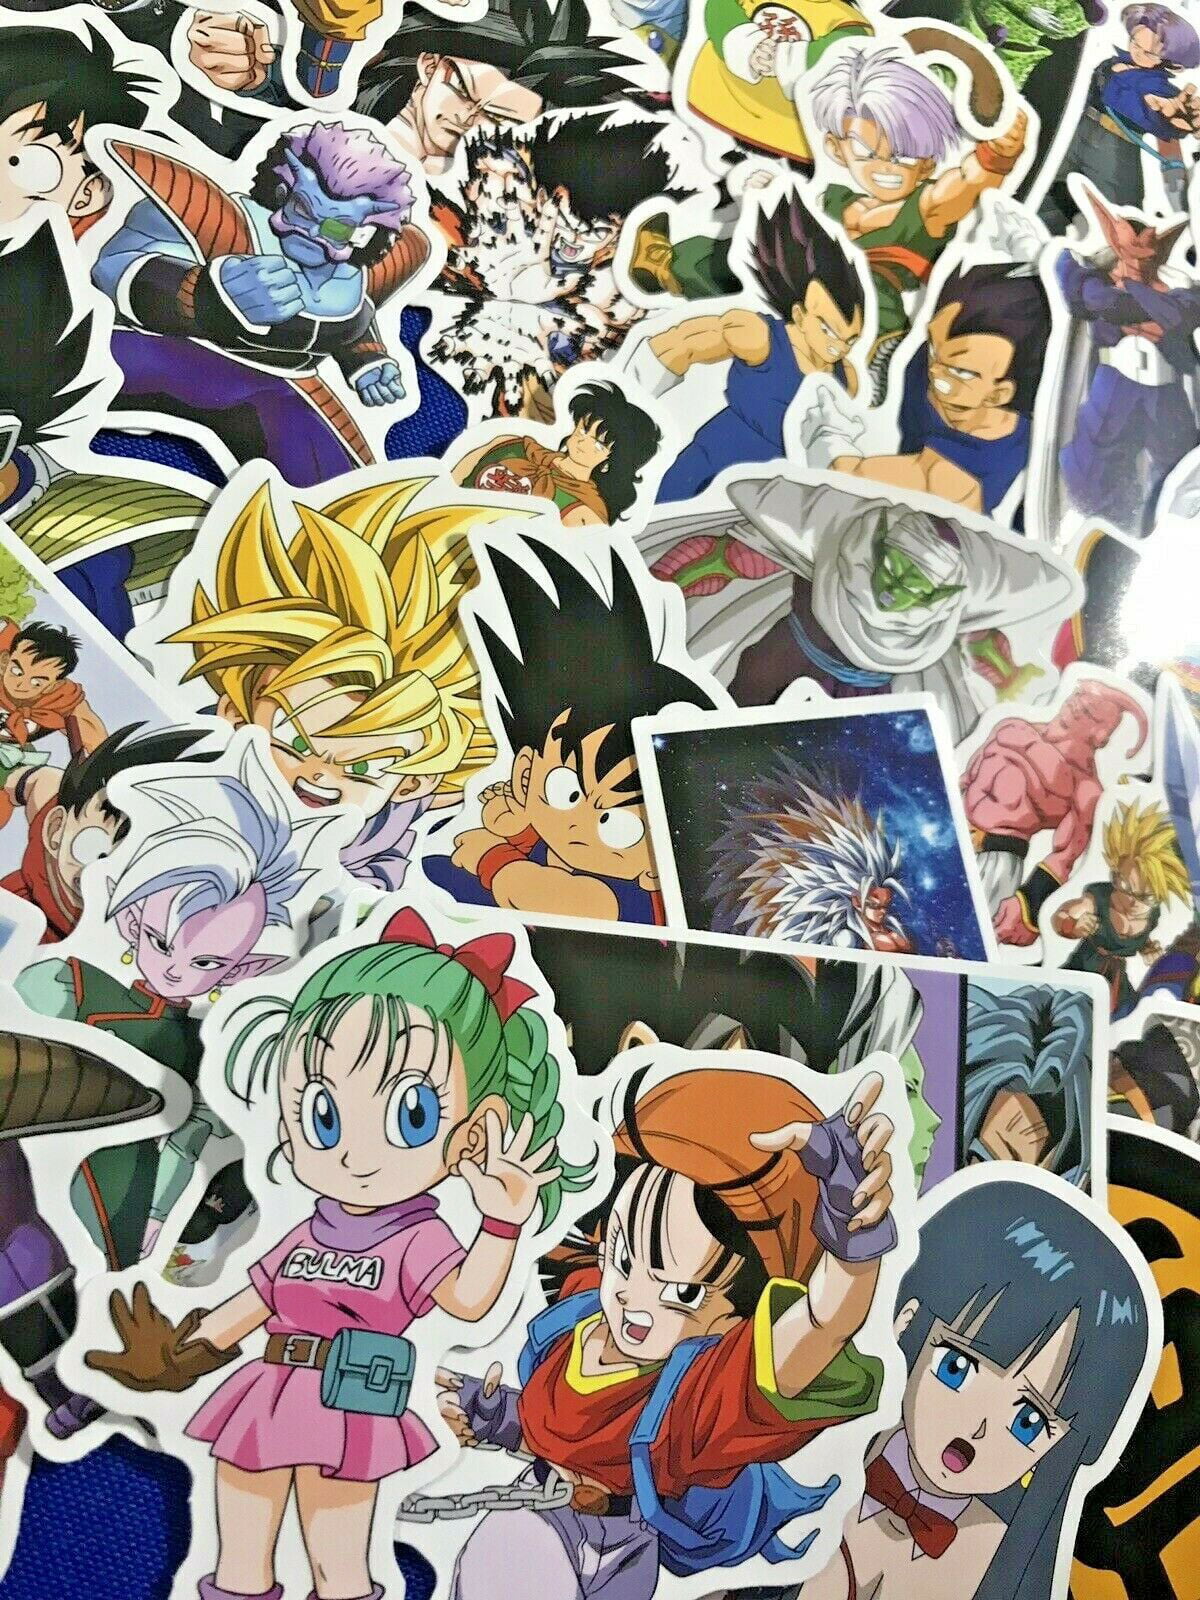 100 Lot Dragon Ball Z GT Character Sticker Pack For Laptop Wall PS4 XBOX  Phone